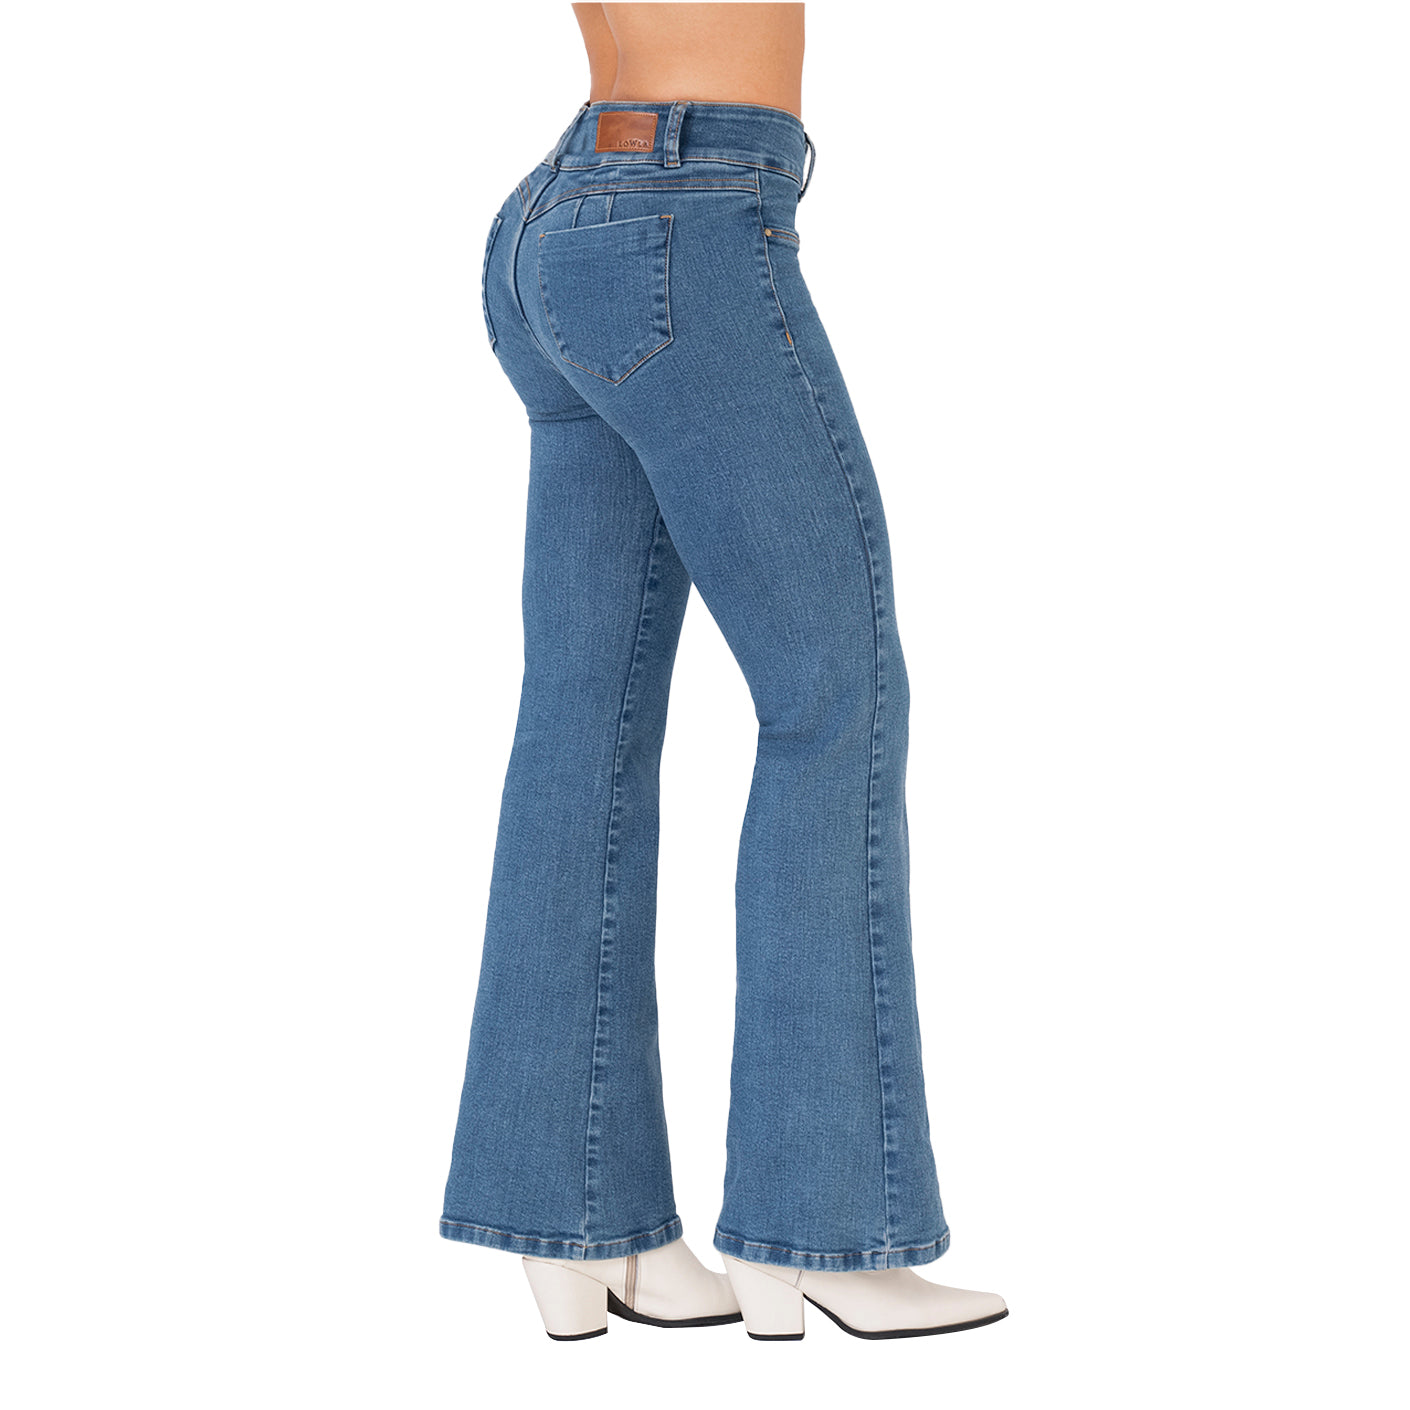 Jeans Colombianos IS3004 – Fajas Colombianas Sale